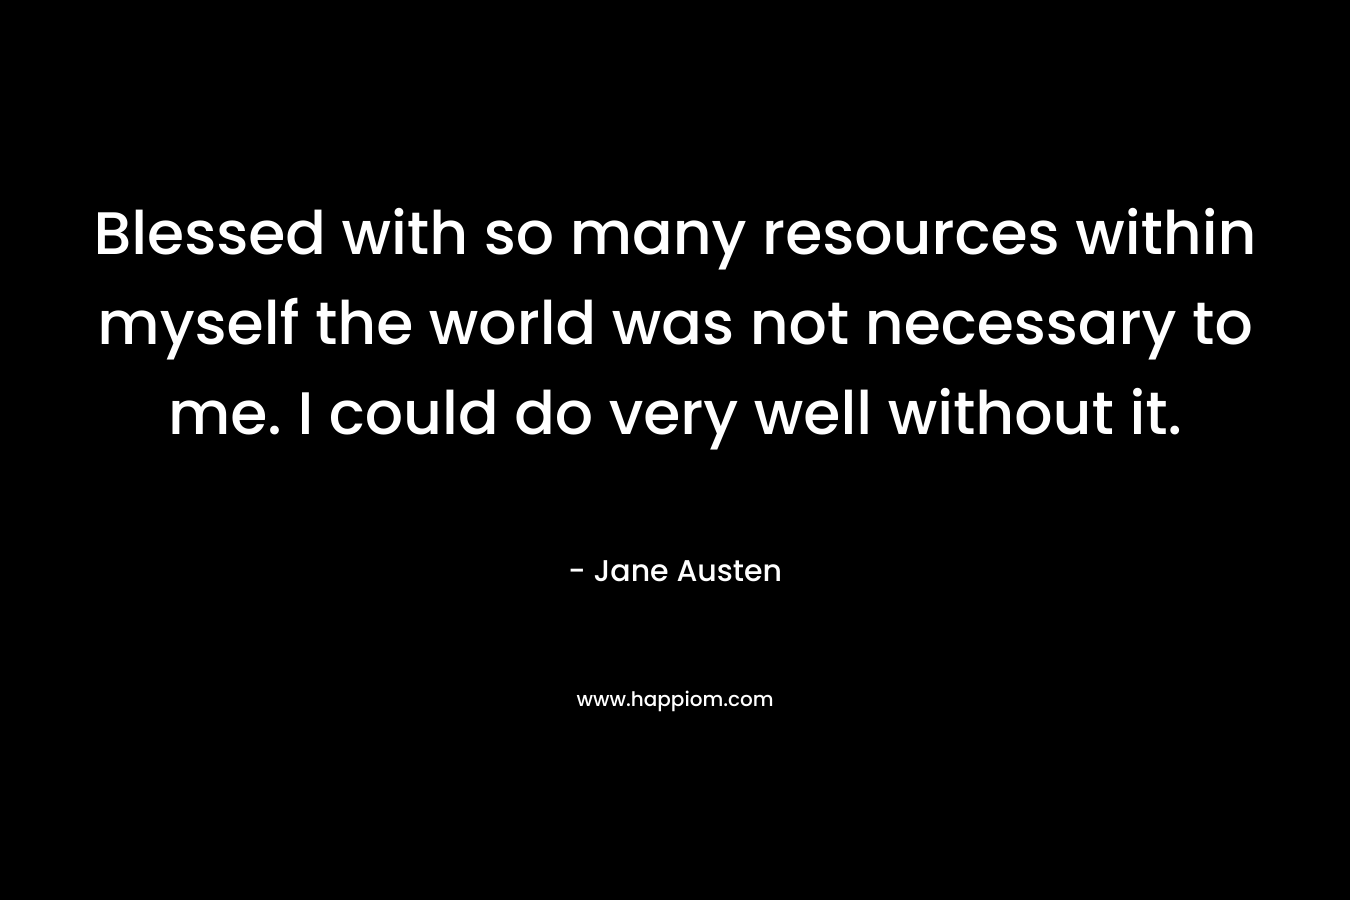 Blessed with so many resources within myself the world was not necessary to me. I could do very well without it.